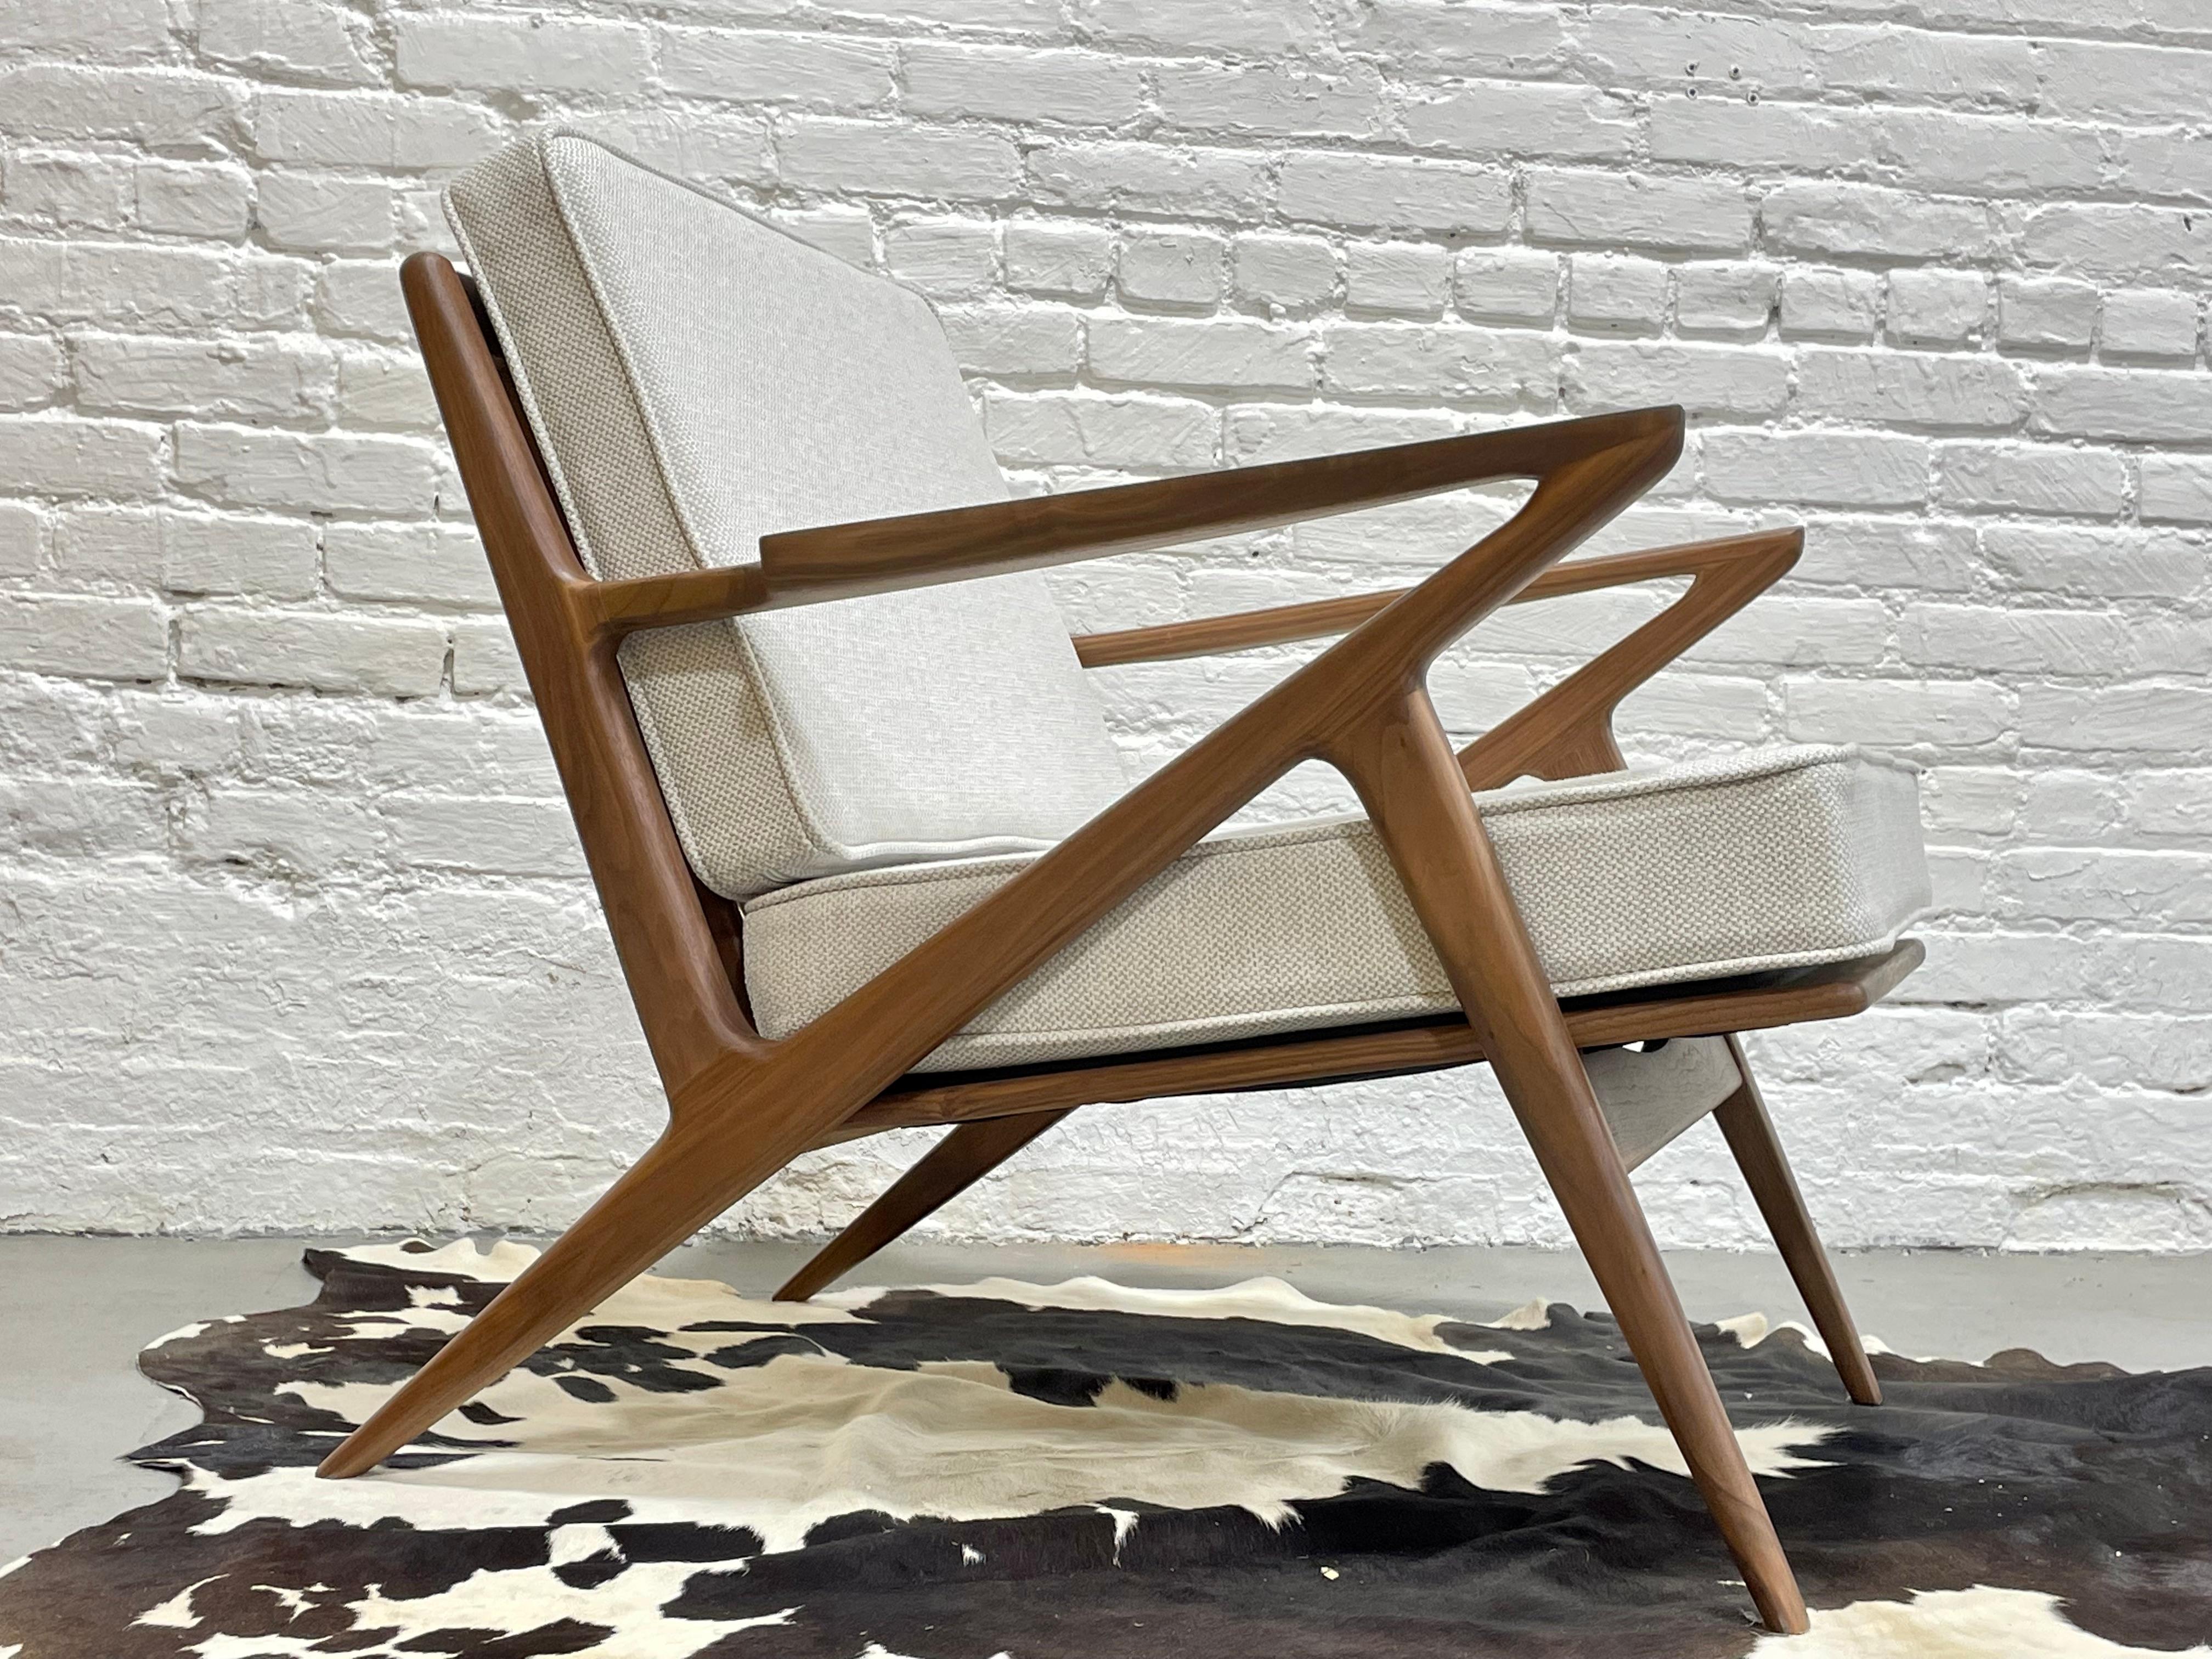 Mid Century Modern styled lounge chair, intricately handcrafted and designed in solid American Walnut. This incredible chair offers loads of design details such as sculptured armrests, triangular back slats and stunning wood grains. The cushions are